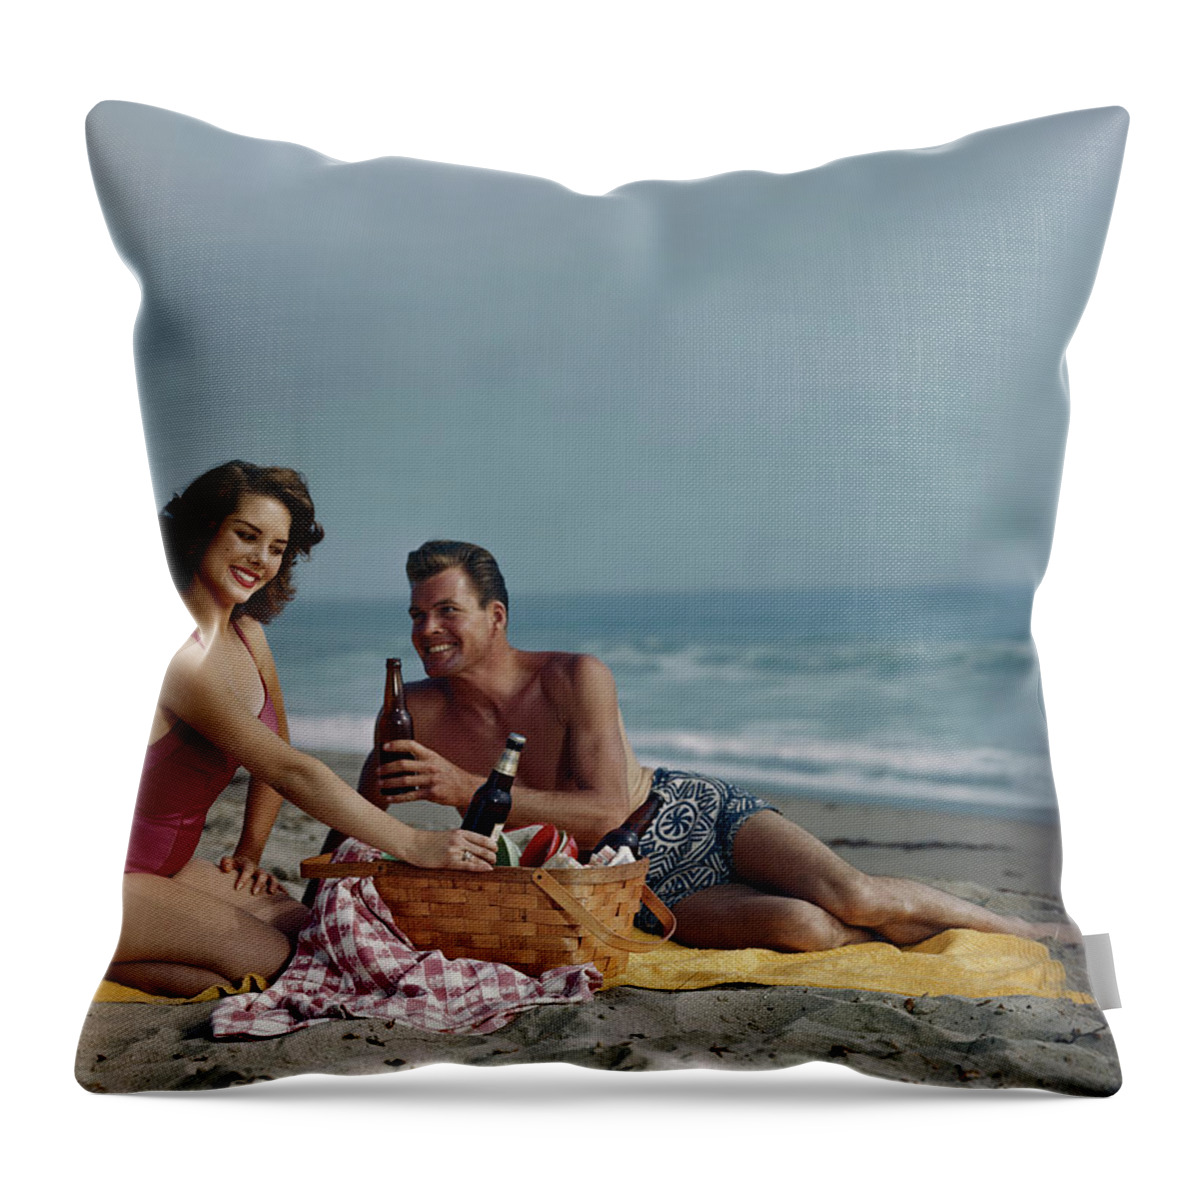 Heterosexual Couple Throw Pillow featuring the photograph Couple Sitting On Beach Holding Beer by Tom Kelley Archive